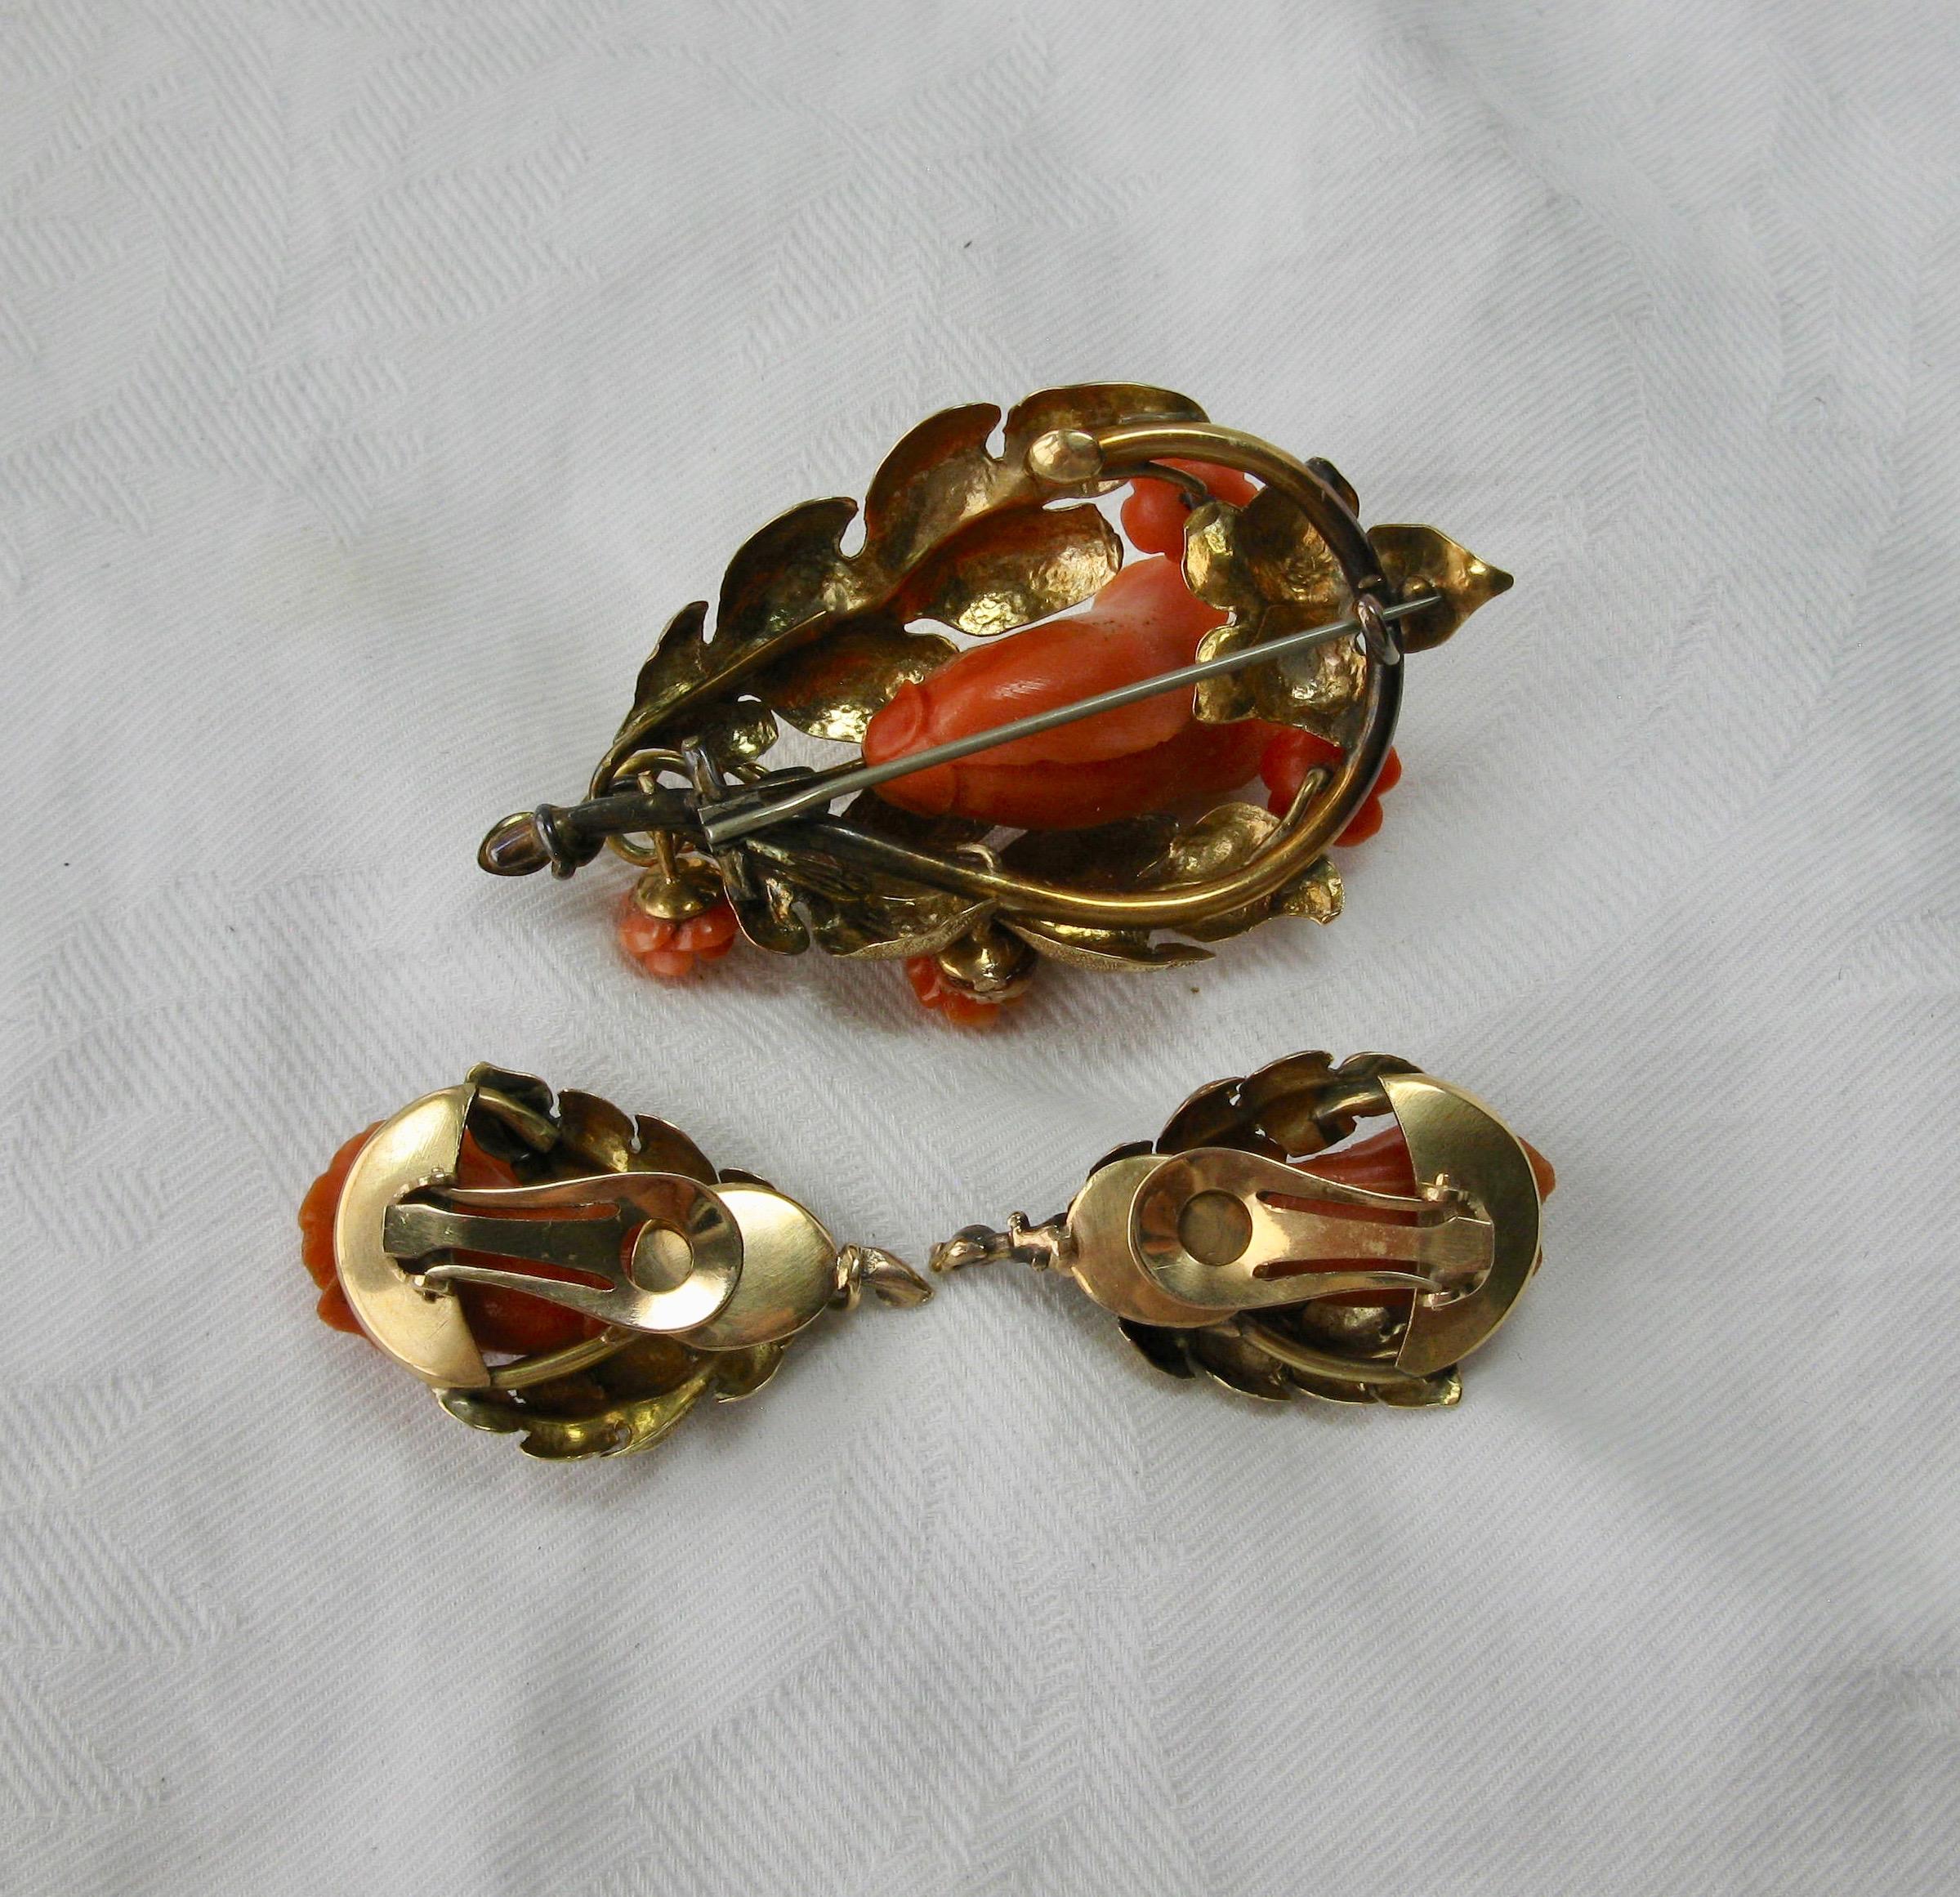 Victorian Coral Earrings And Brooch Flower Leaf Motif 14 Karat Gold Circa 1870 For Sale 5